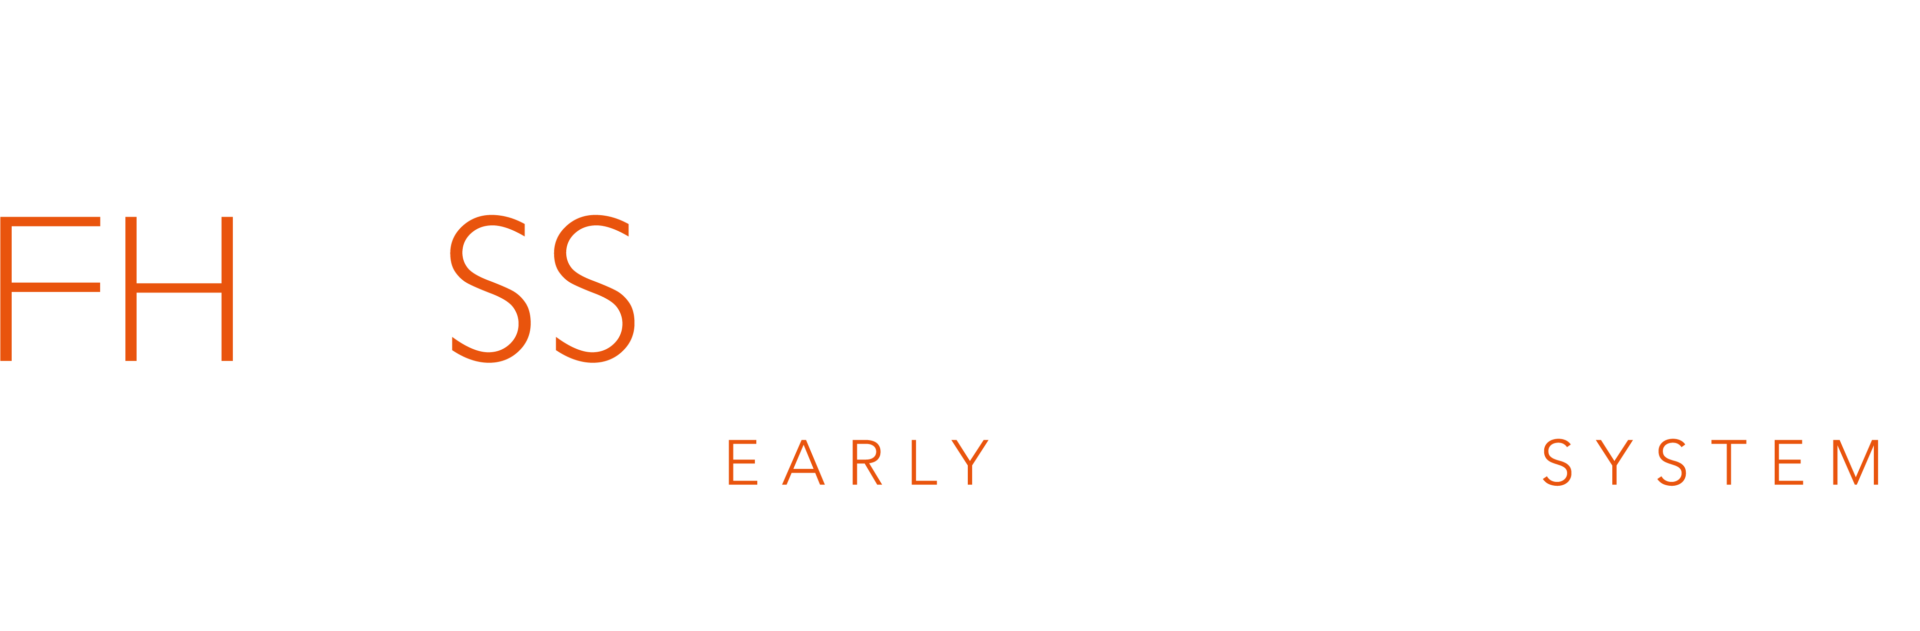 Cycle Lane Early Warning System